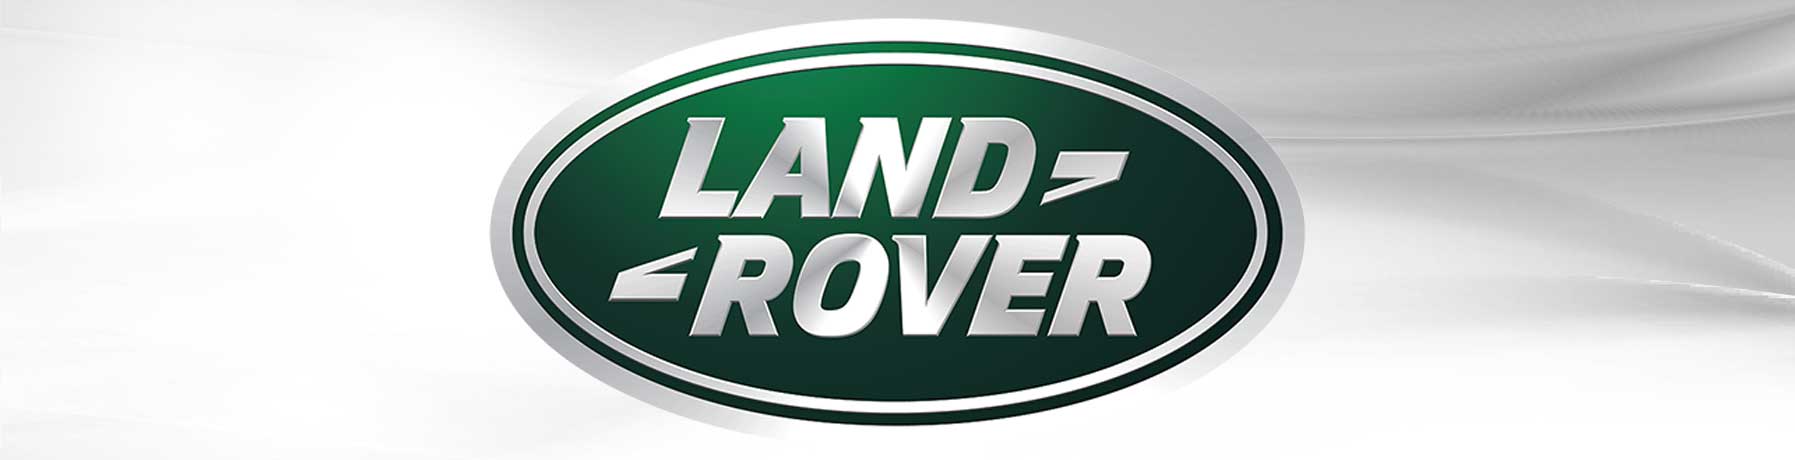 We service land rovers